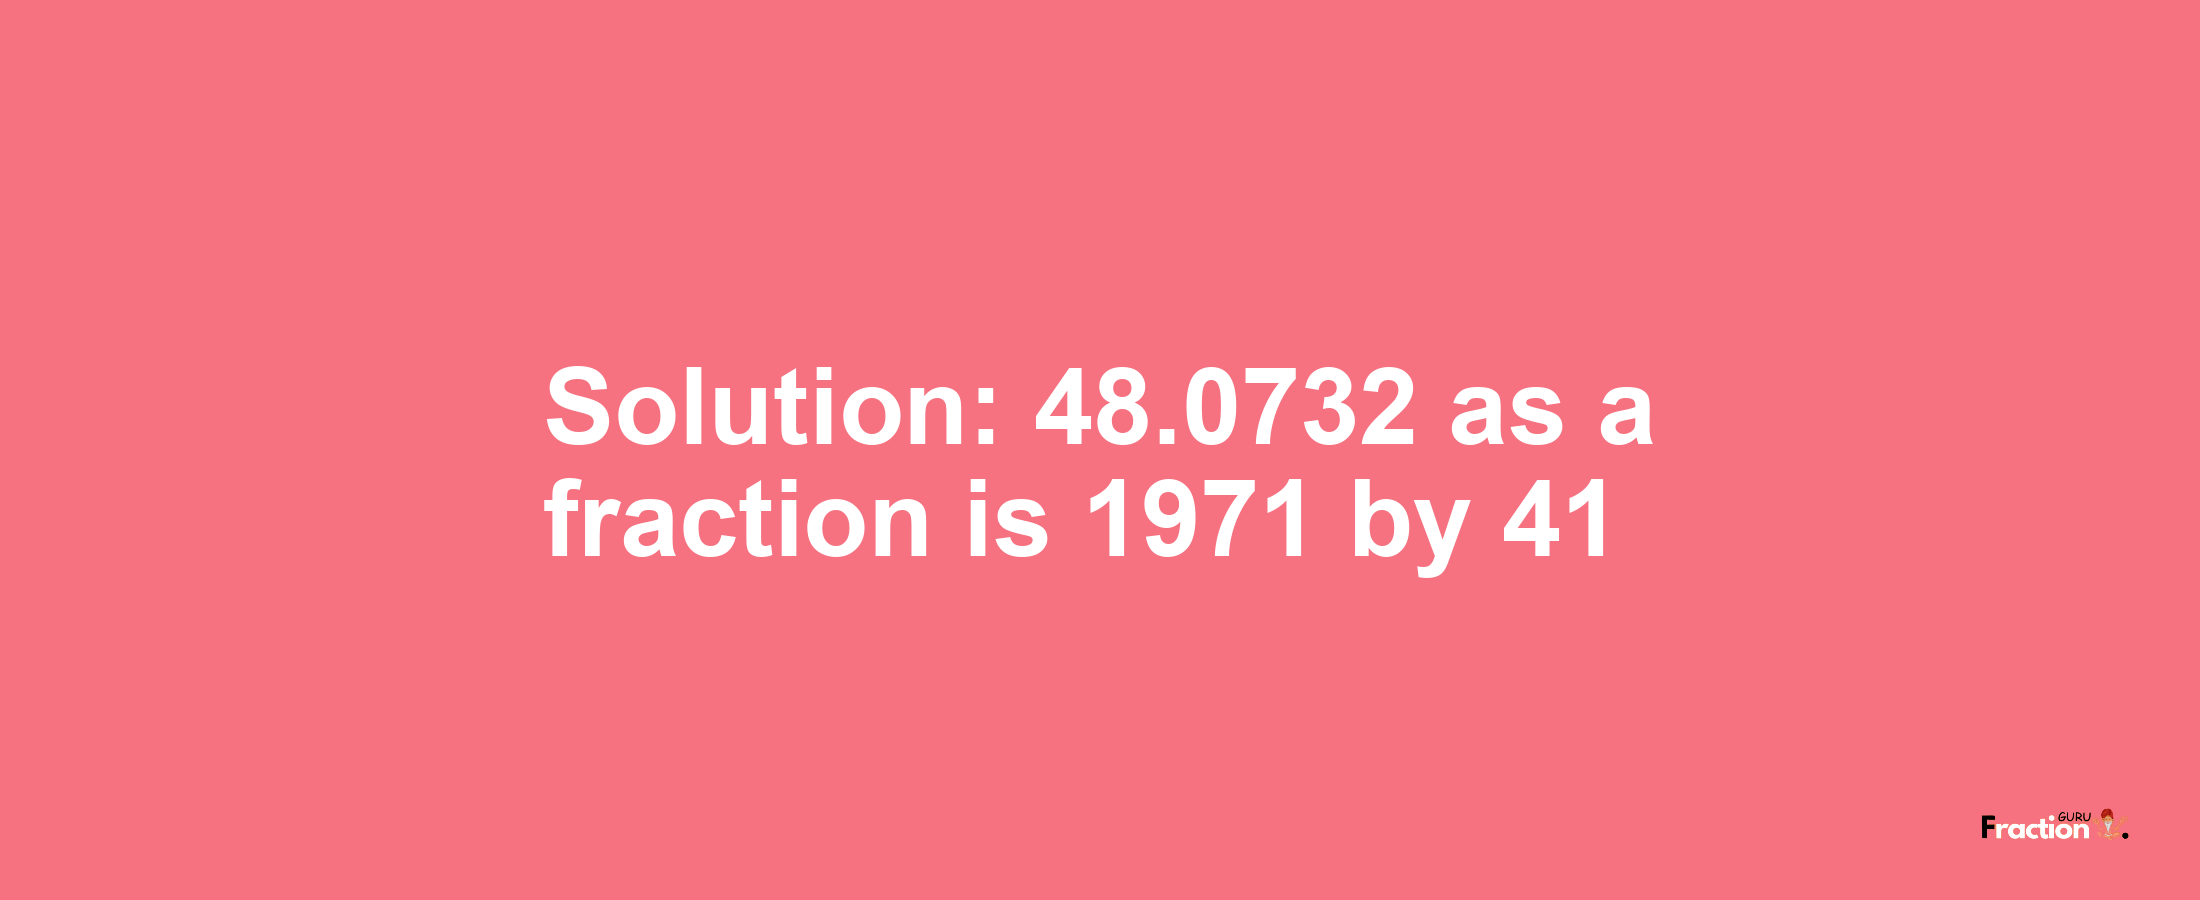 Solution:48.0732 as a fraction is 1971/41